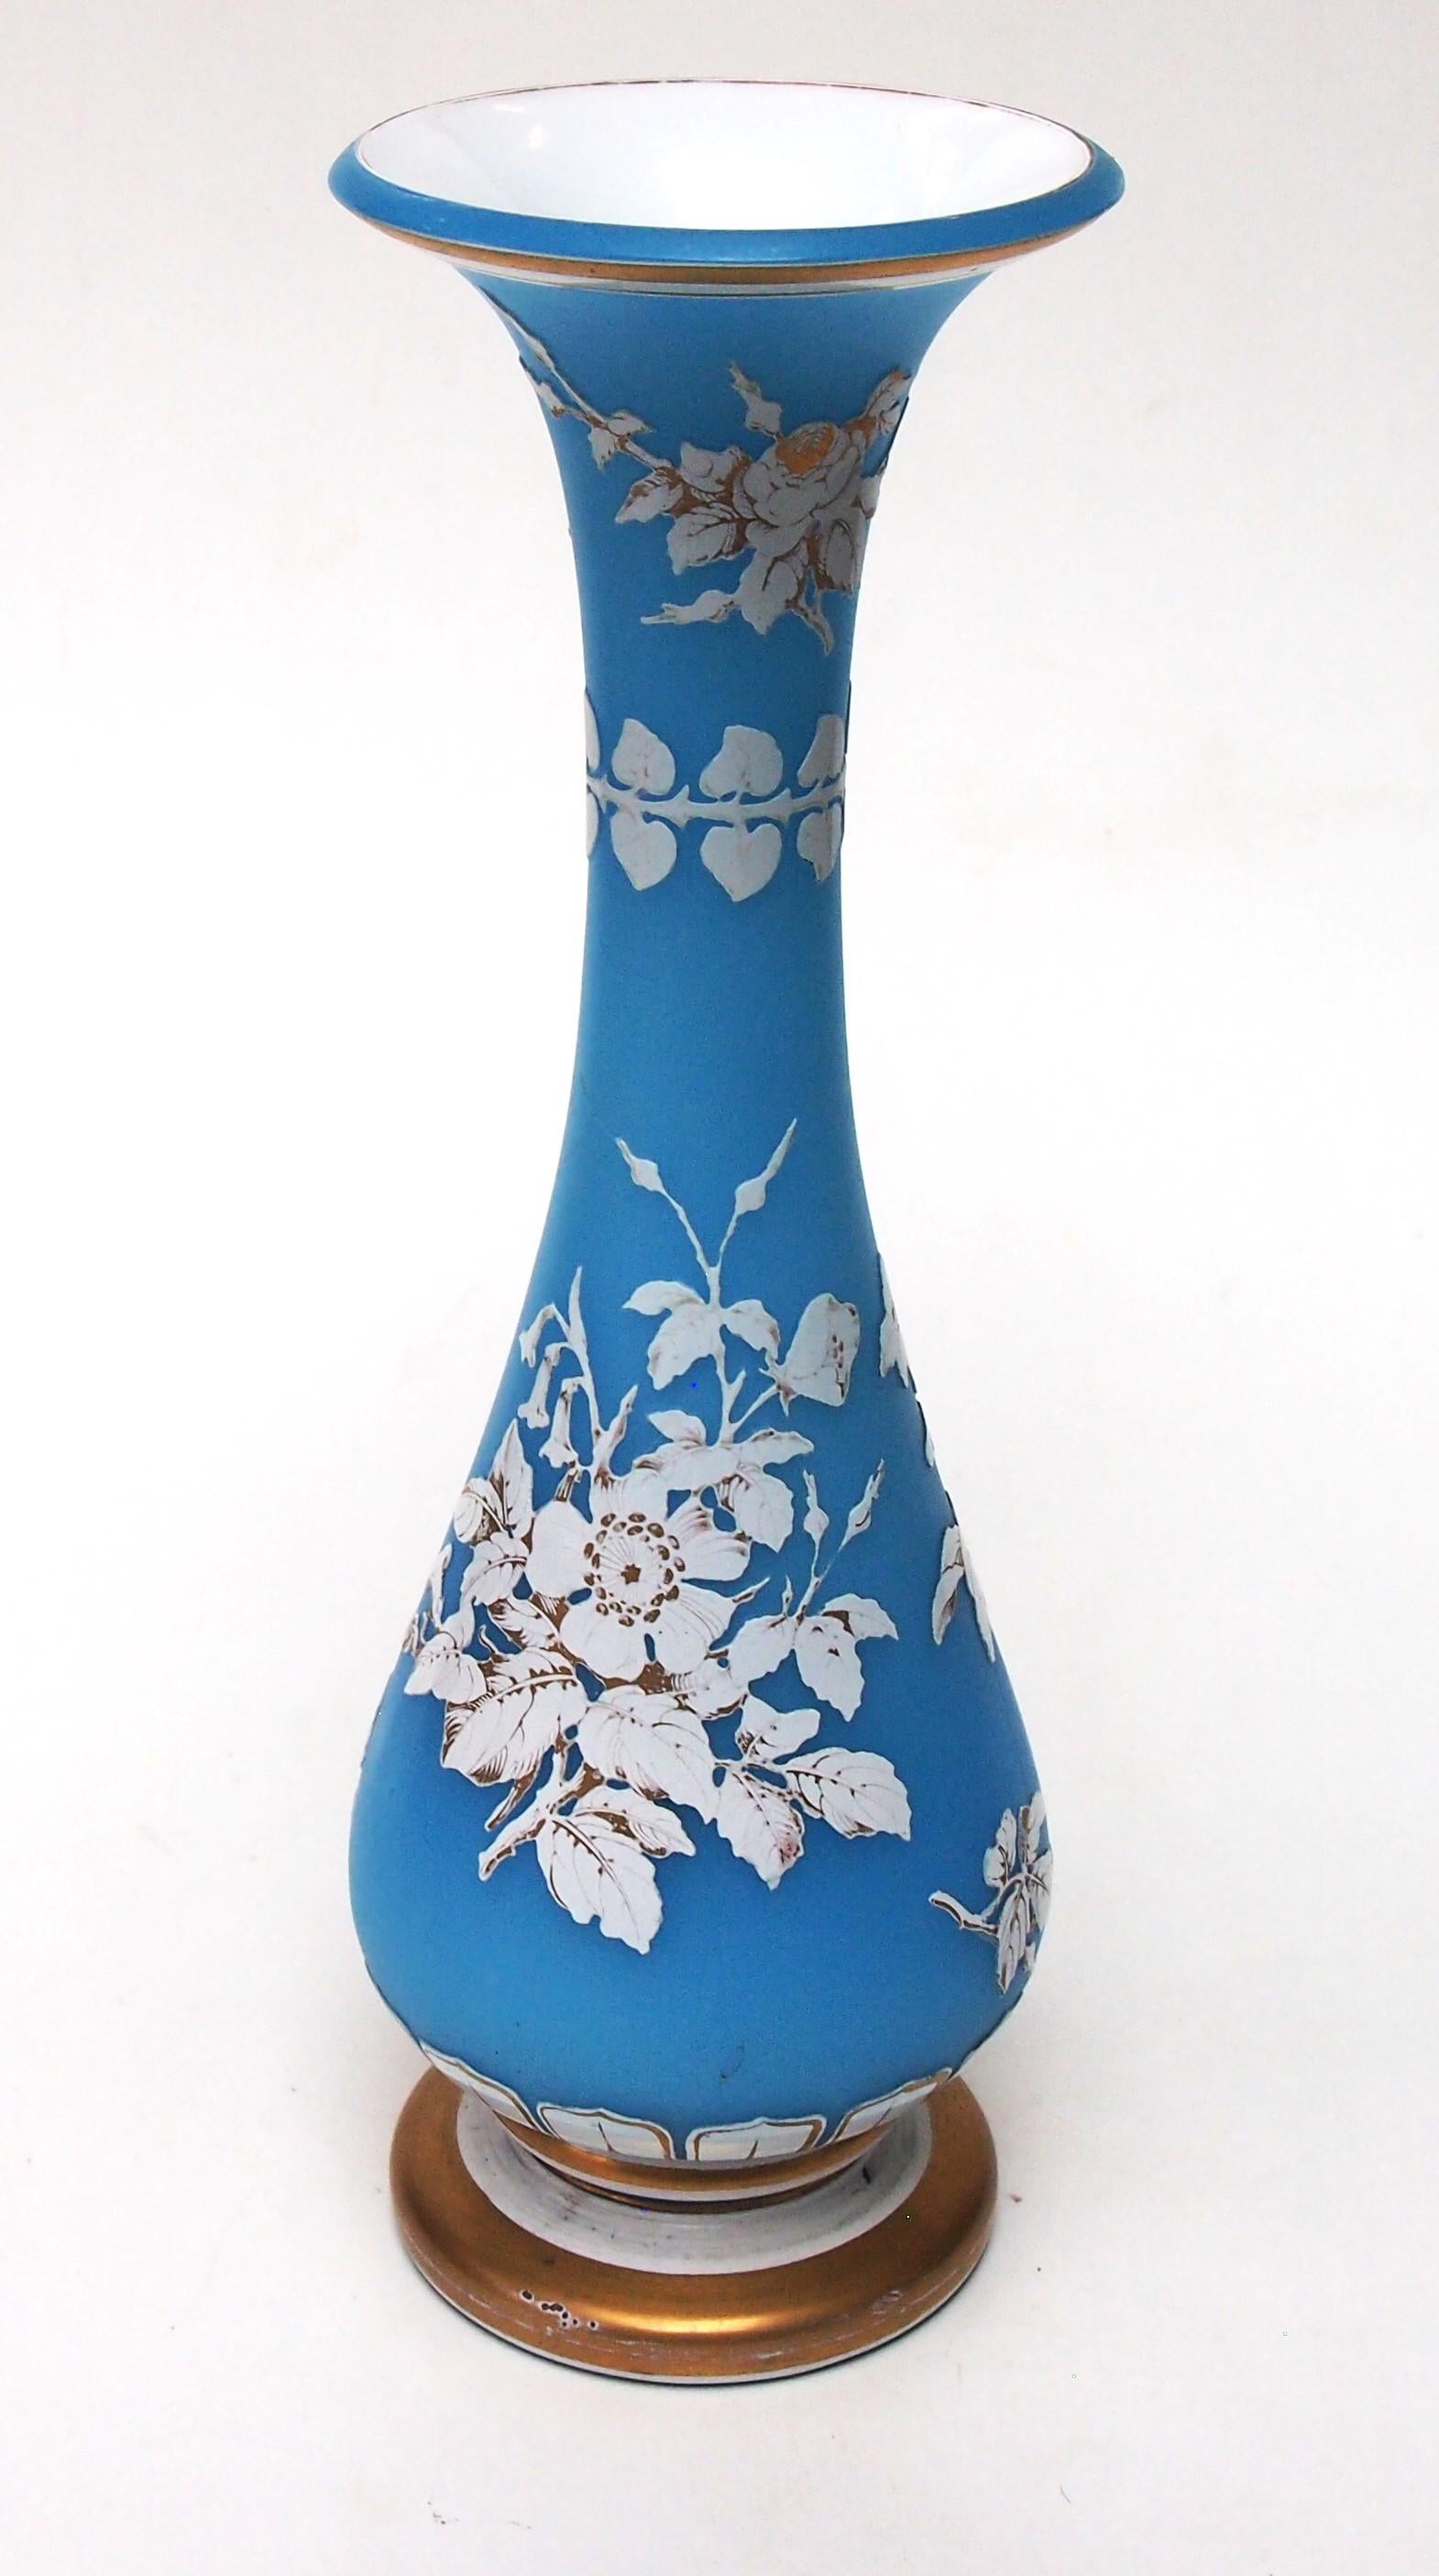 Early Victorian Bohemian Art Nouveau Harrach Blue and White Botanical Cameo Glass Vase, 1860 For Sale